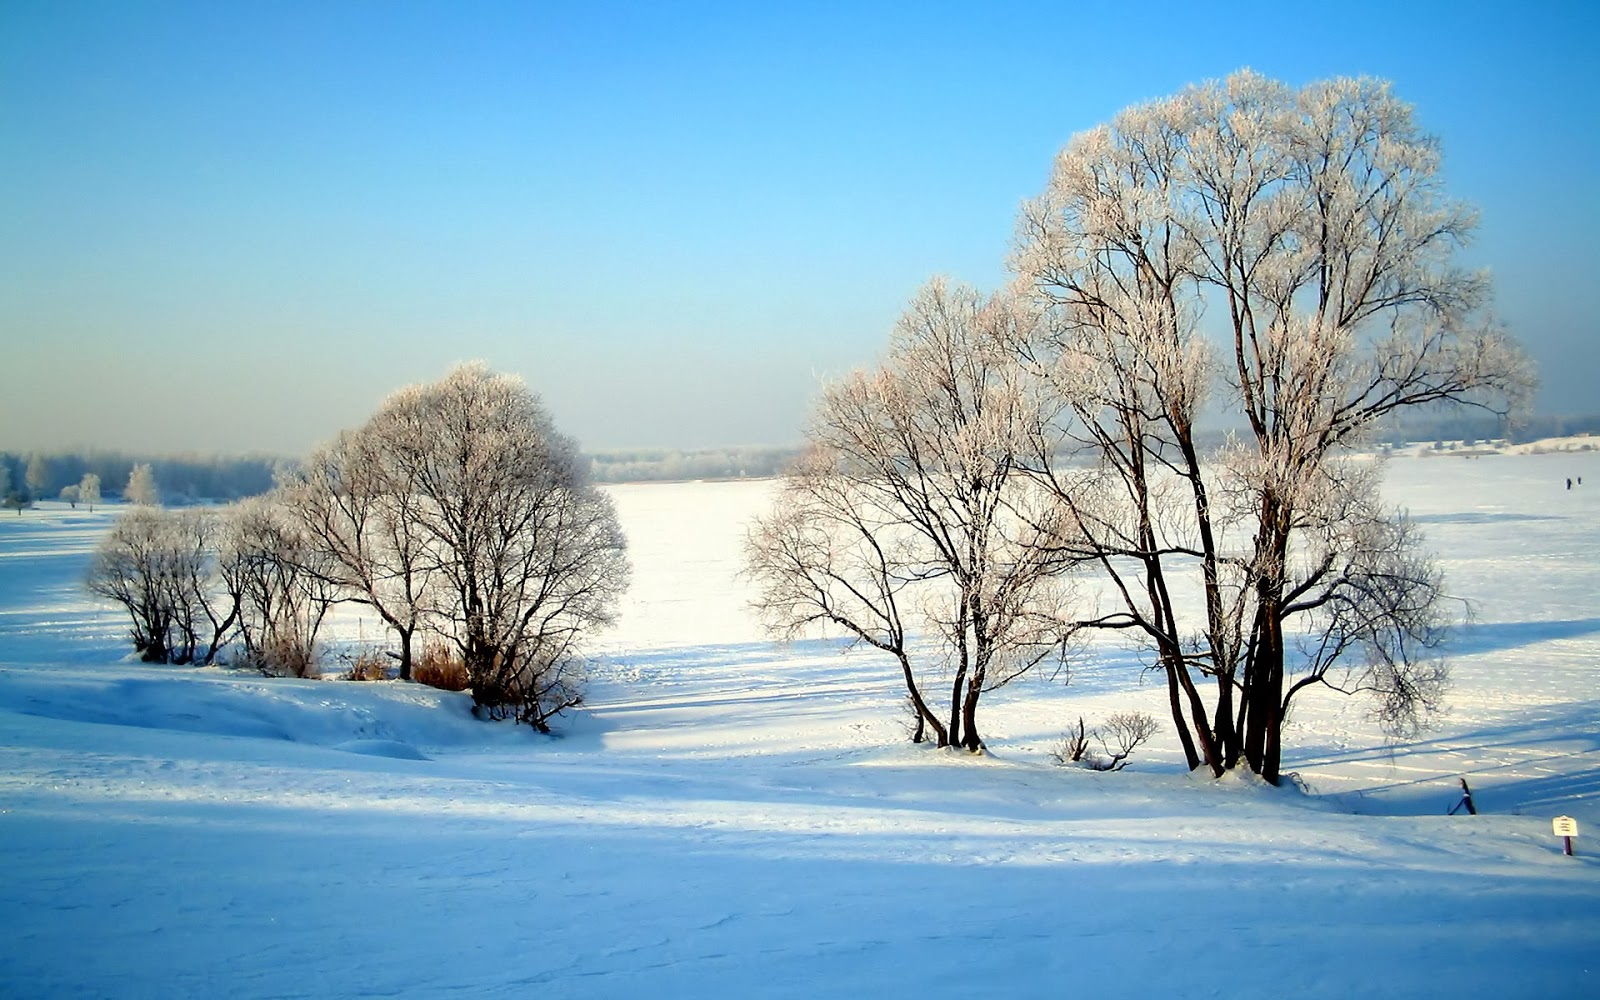 Snow Fall Winter HD Wallpapers - HD Wallpapers Blog